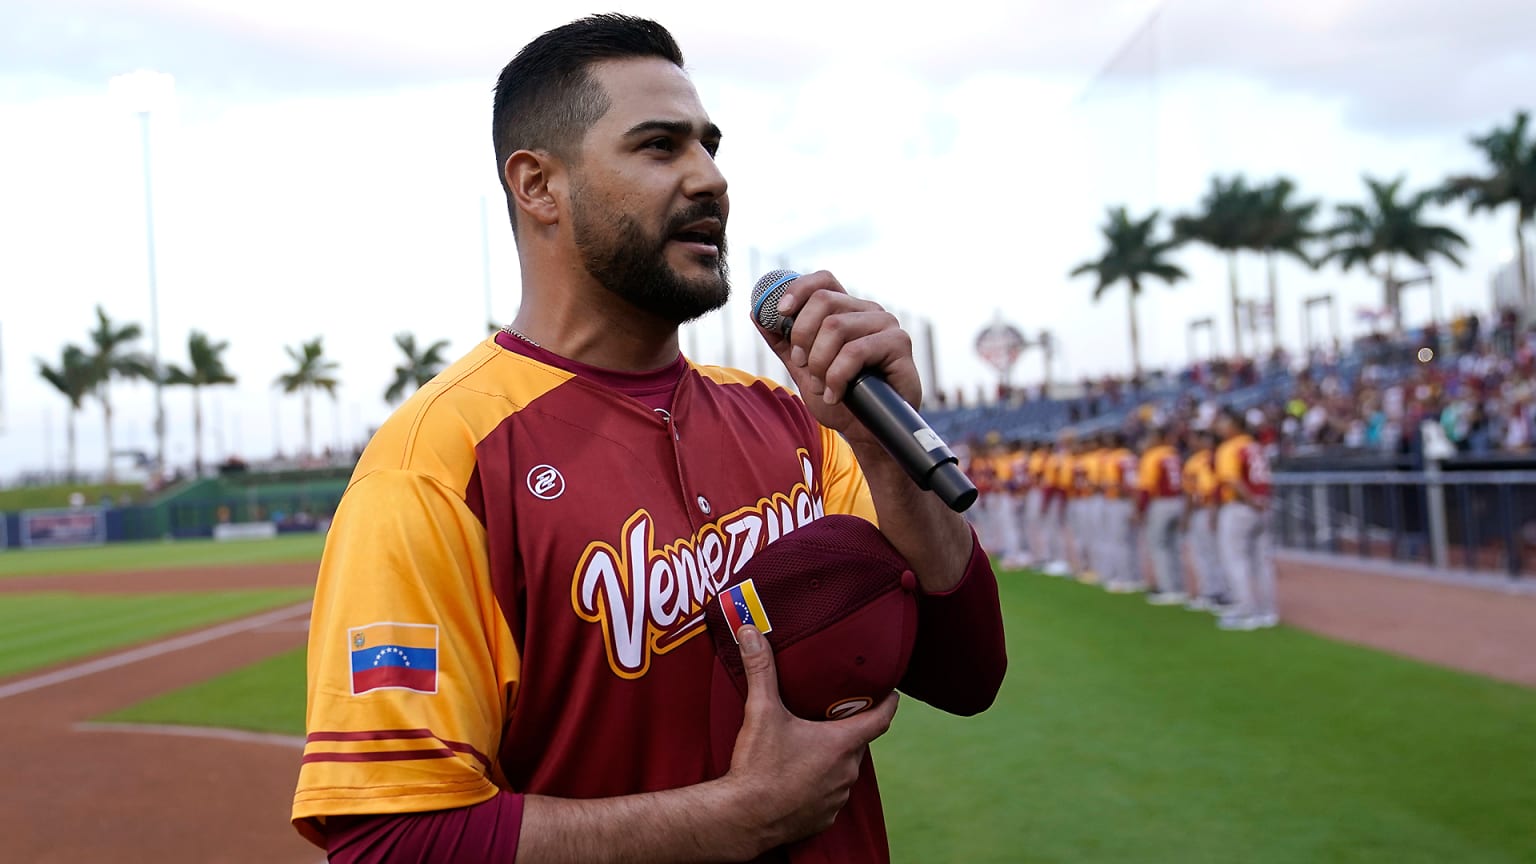 A player in a Venezuela jersey holds his cap over his heart while singing into a microphone